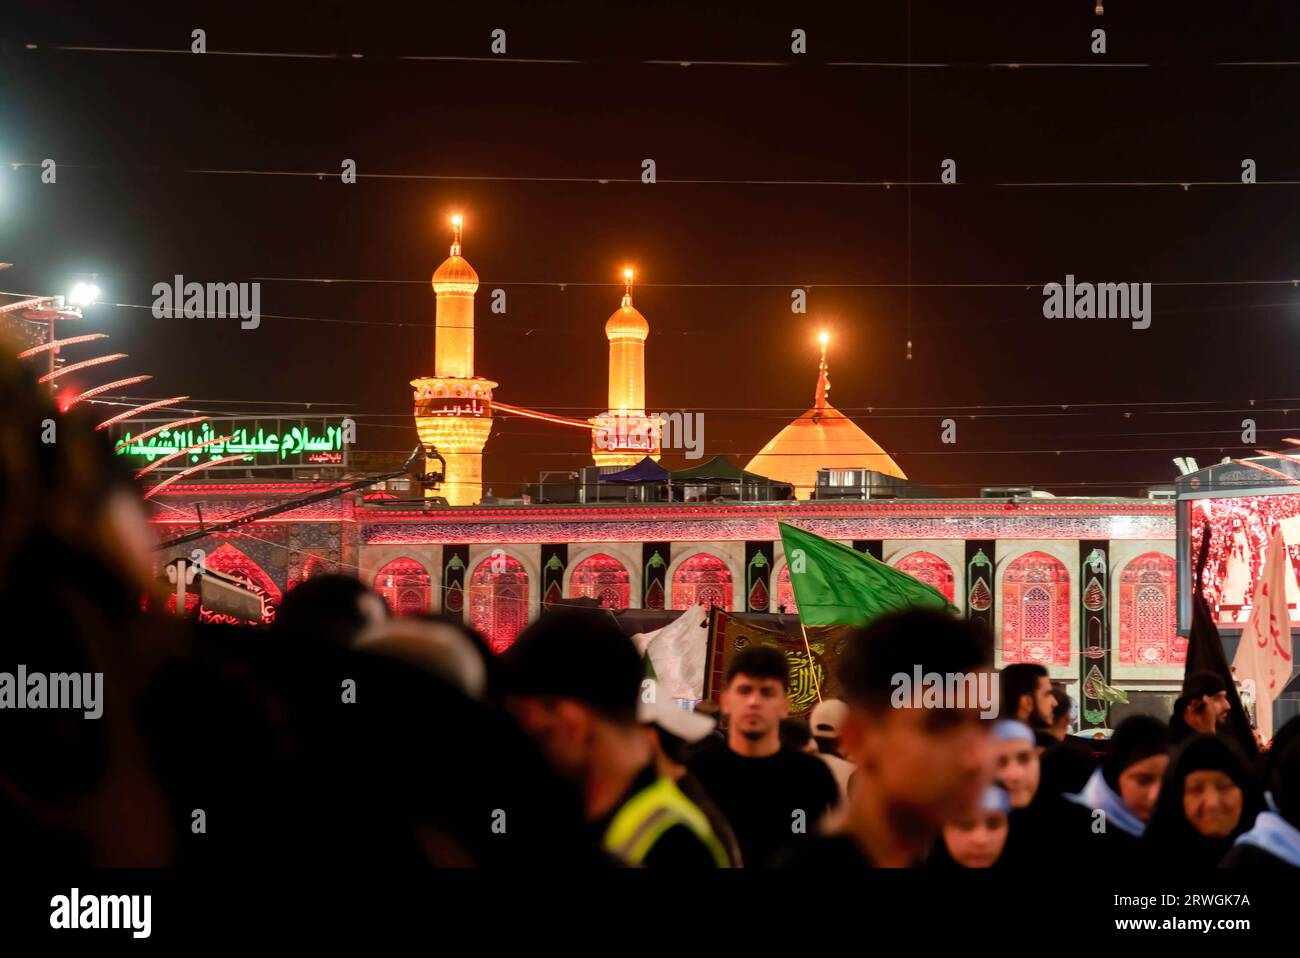 View of Shrine of Imam Hussein on Arbaeen day in Karbala. Every year, millions of Shia Muslims and some from other faiths undertake a 20-day pilgrimage on foot from various cities in Iraq and Iran to the holy city of Karbala. This pilgrimage is in remembrance of Imam Hussein, the grandson of the Prophet Muhammad, who died in a battle in 680 AD. On the 40th day of mourning for Hussein, known as Arbaeen, pilgrims converge in Karbala to pay tribute at his shrine. Along the way, volunteers provide food, water, and shelter, and villagers open their doors to the pilgrims. Stock Photo